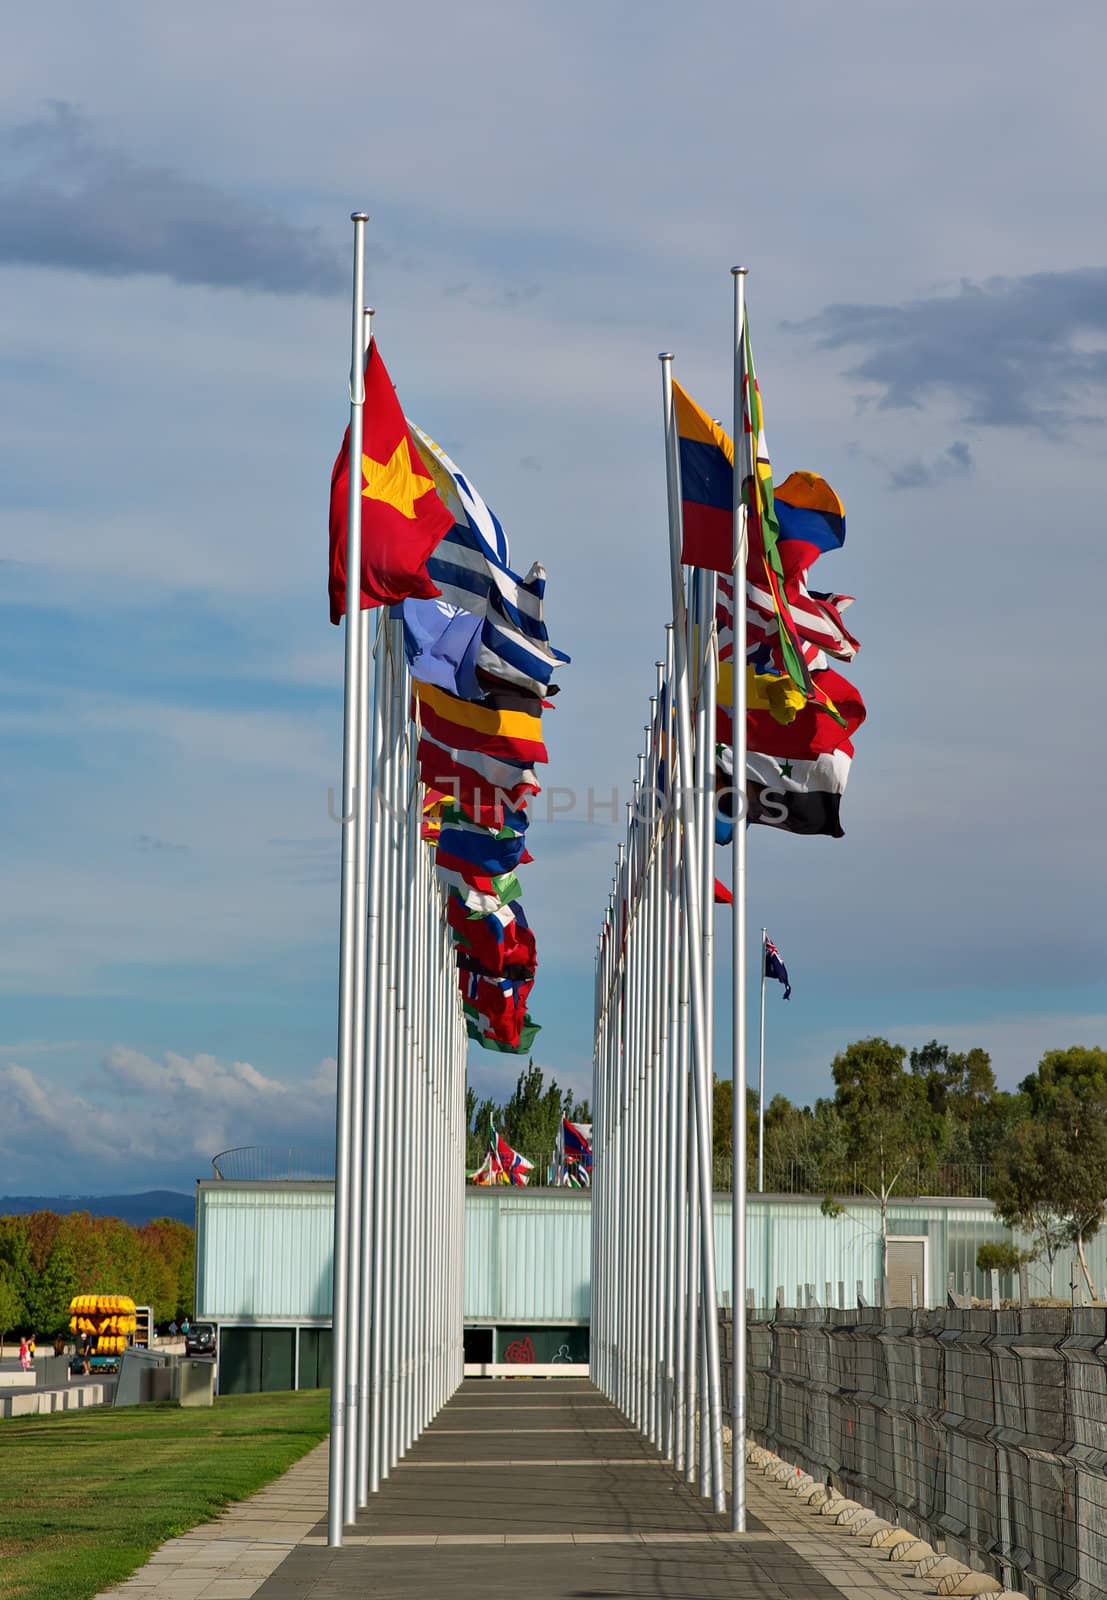 flags of the world flapping in the wind